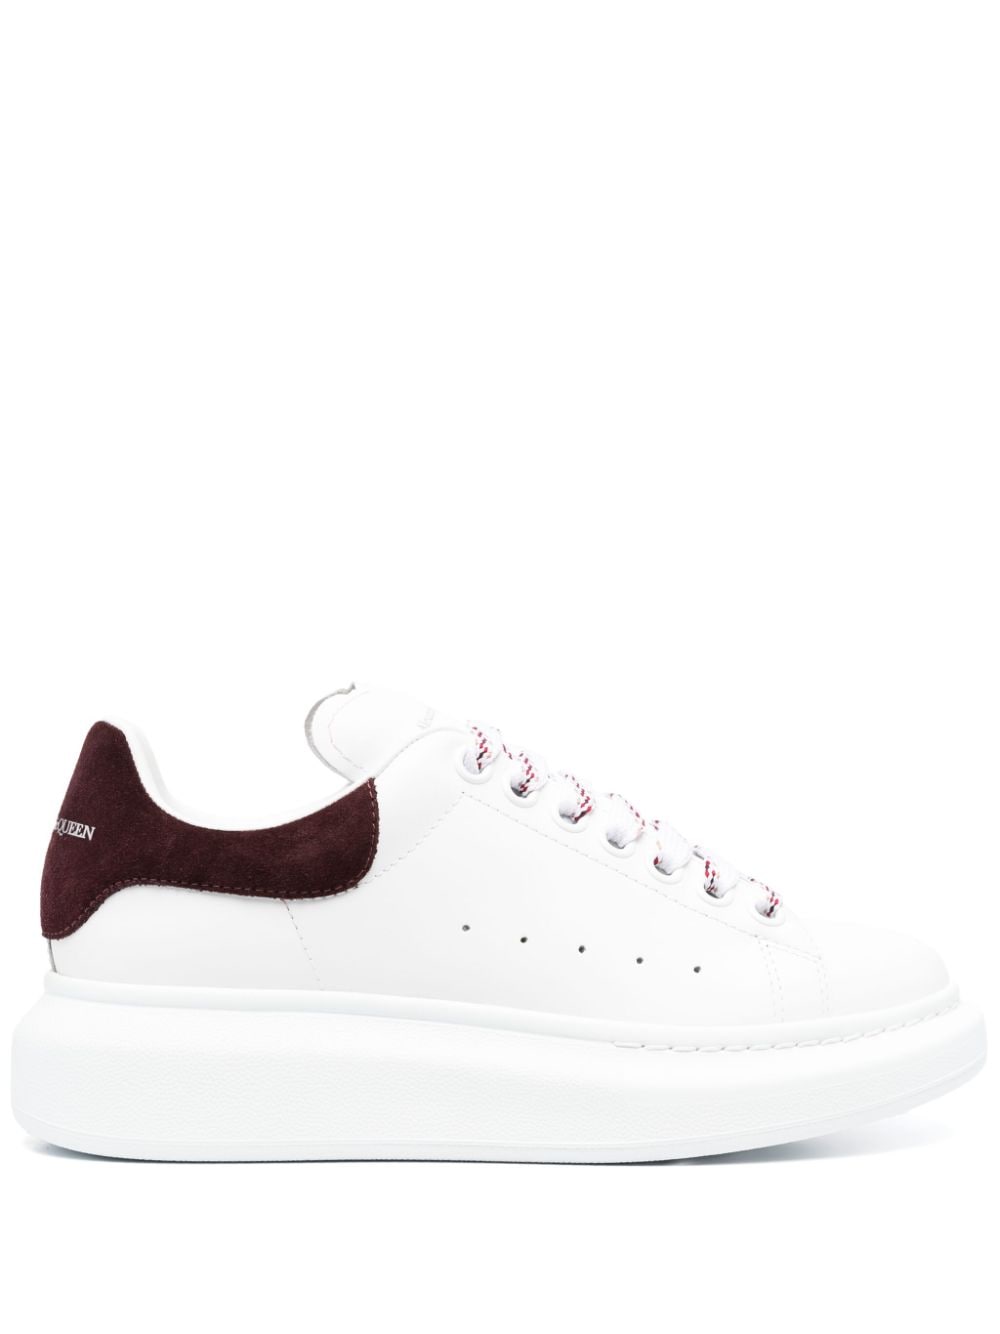 White/burgundy leather/suede oversized low-top sneakers